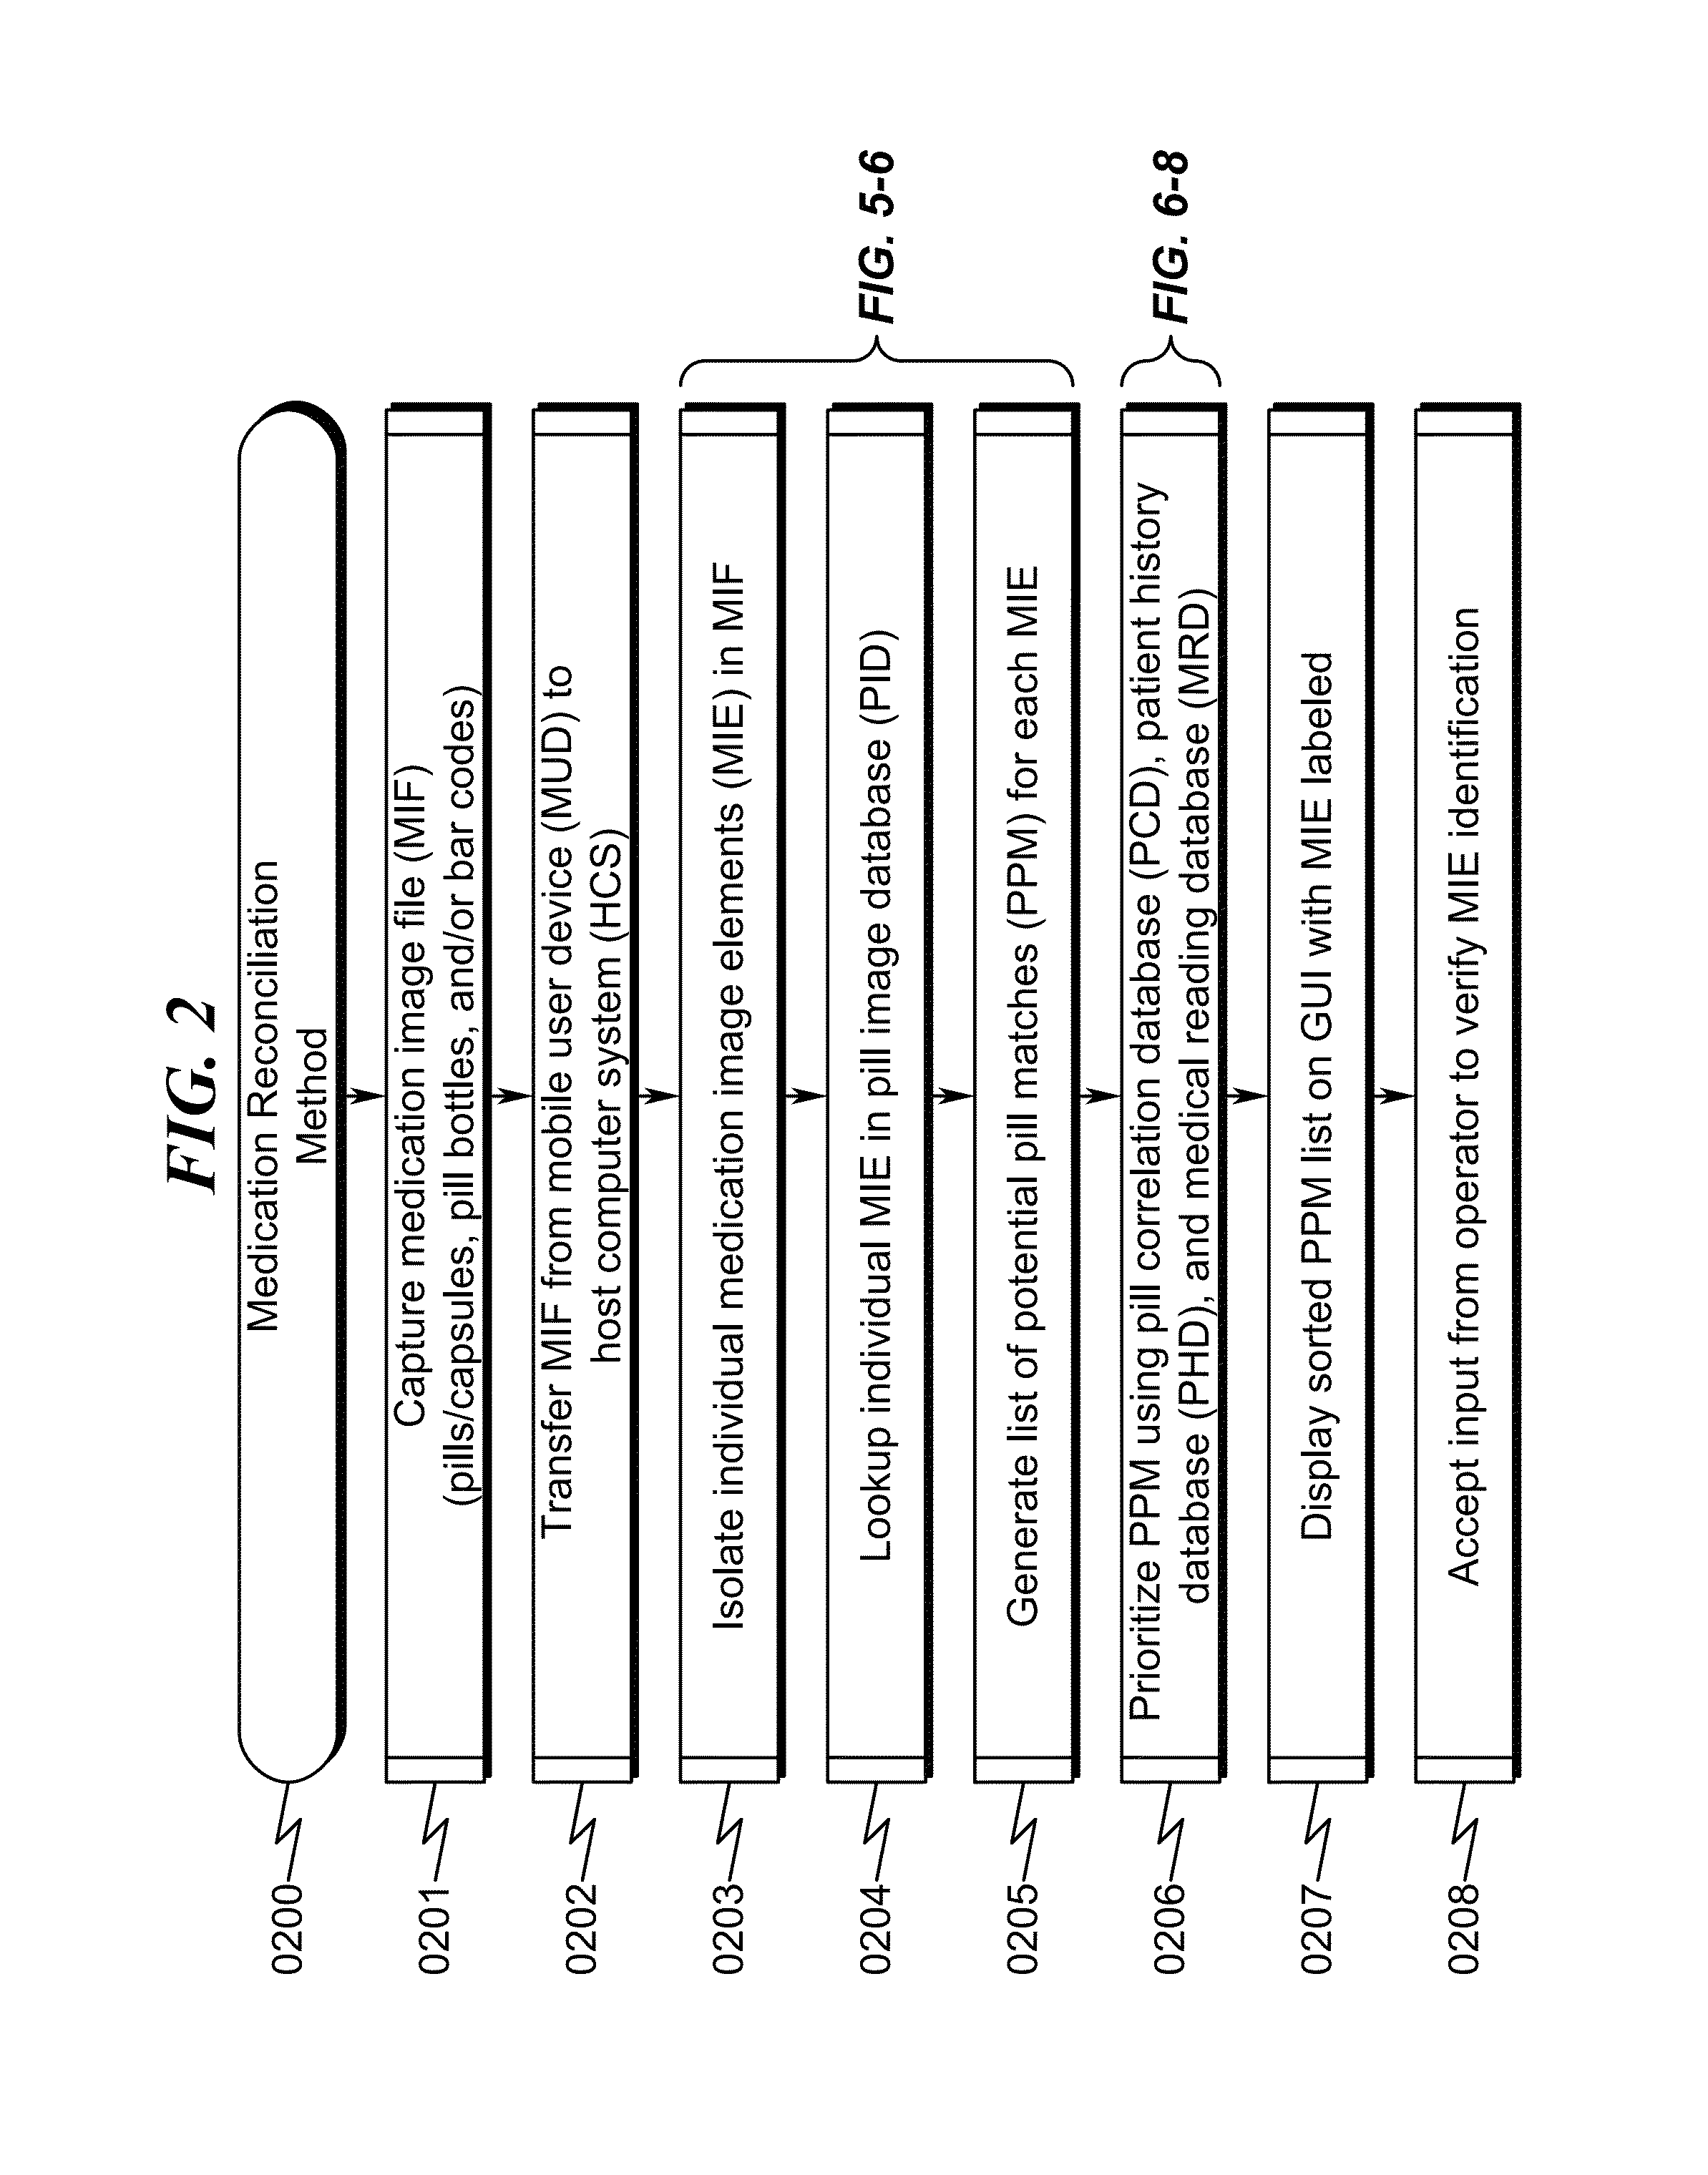 Medication reconciliation system and method